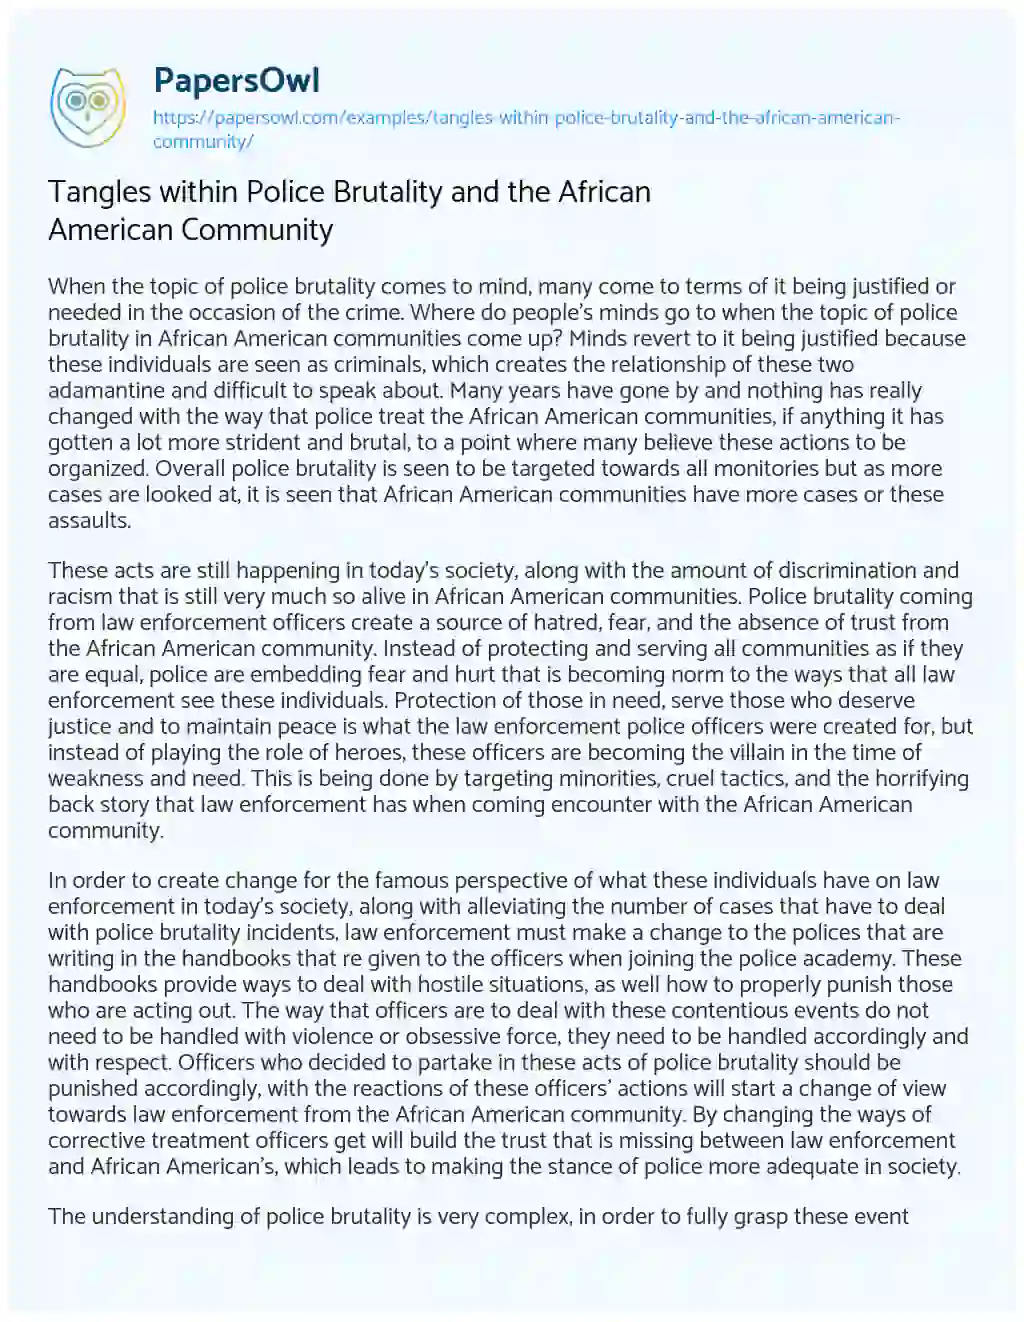 Essay on Tangles Within Police Brutality and the African American Community